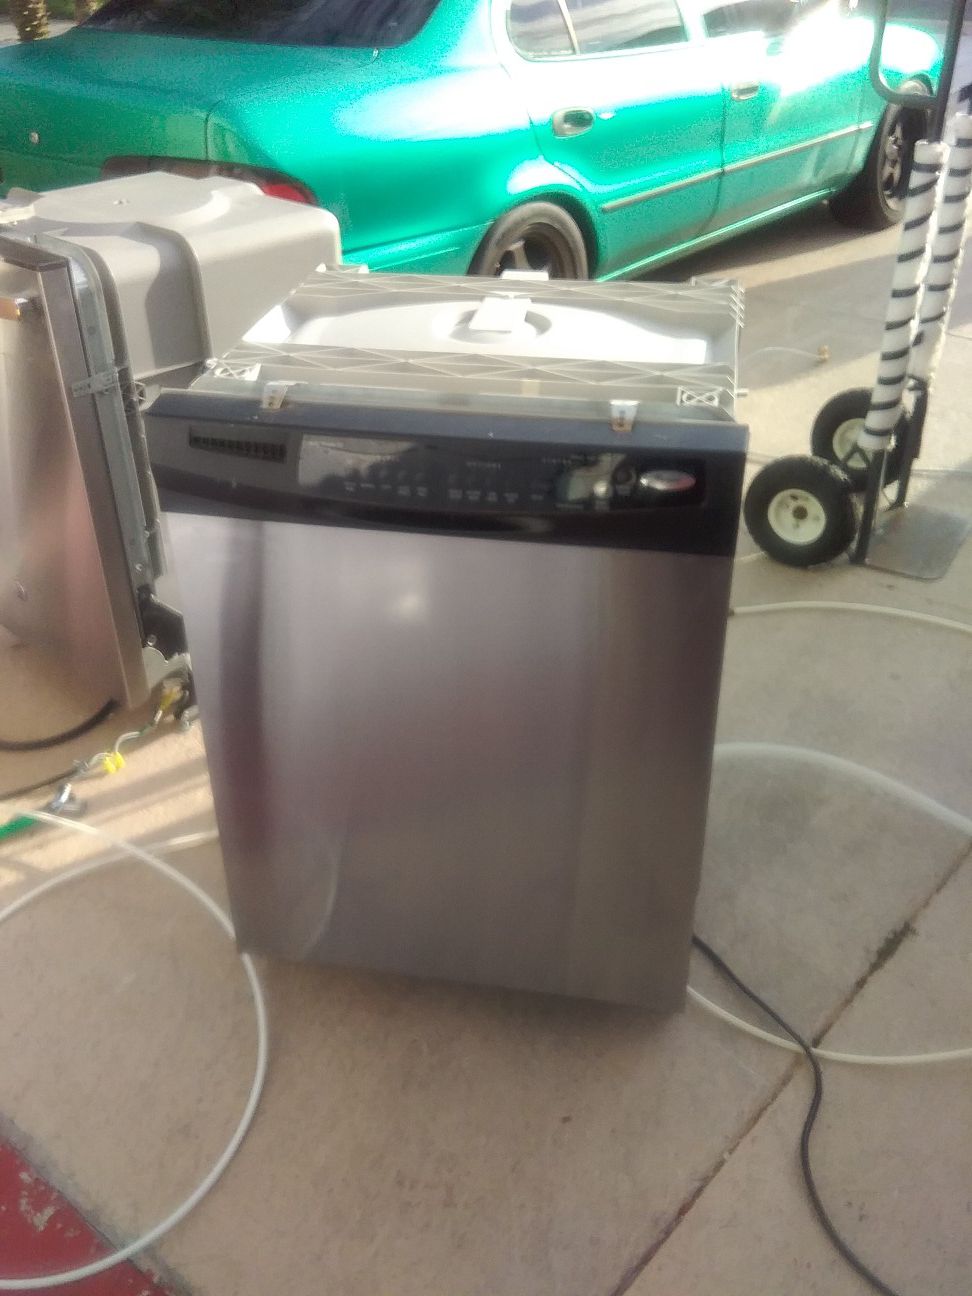 Stainless steel whirlpool dishwasher with plastic tub in good working condition